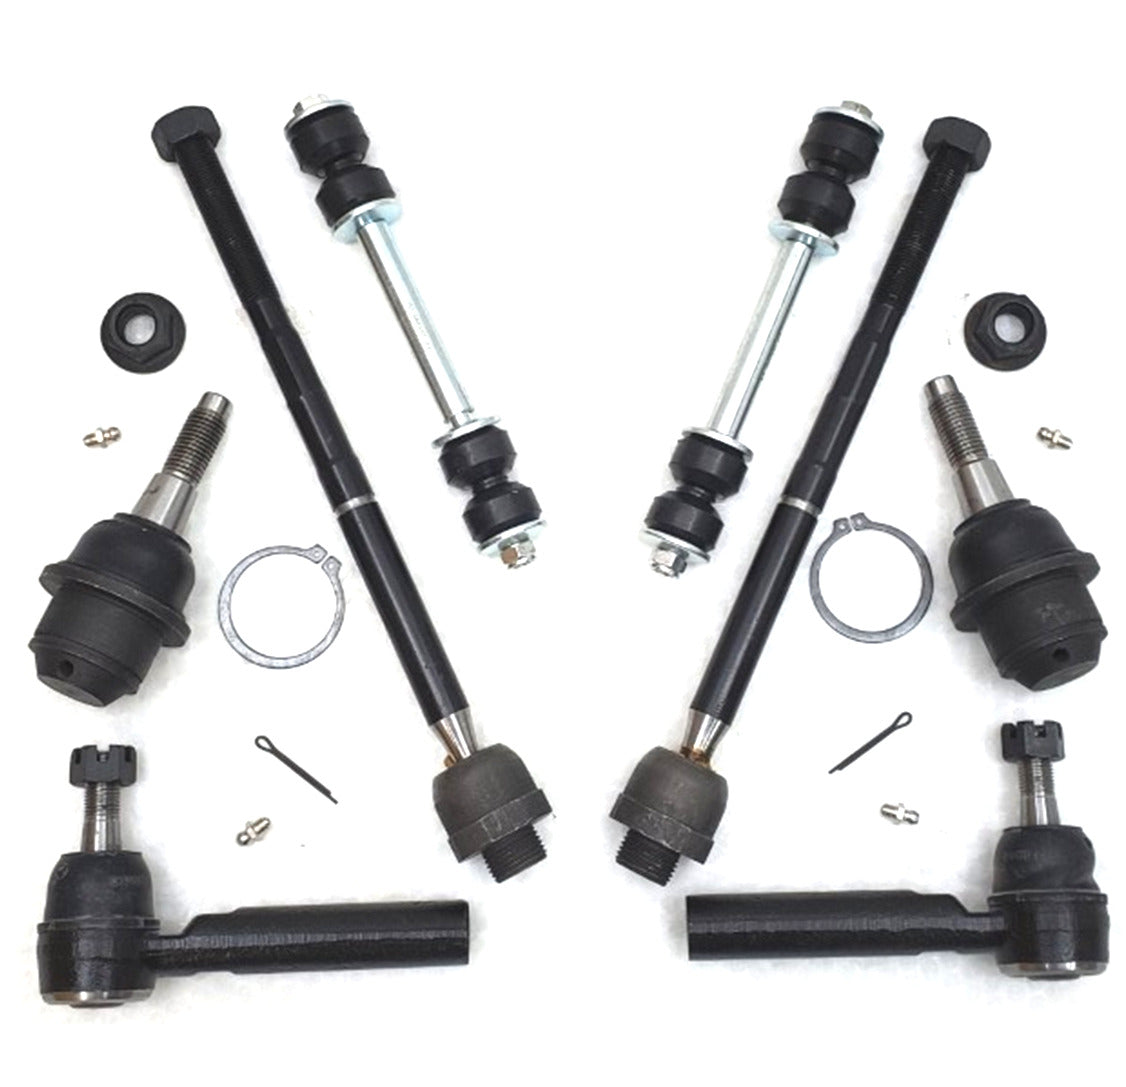 XRF Ball Joint Tie Rod Links Steering Kit for 2007-2013 Cadillac, Chevrolet, GMC, 2WD, 4x4